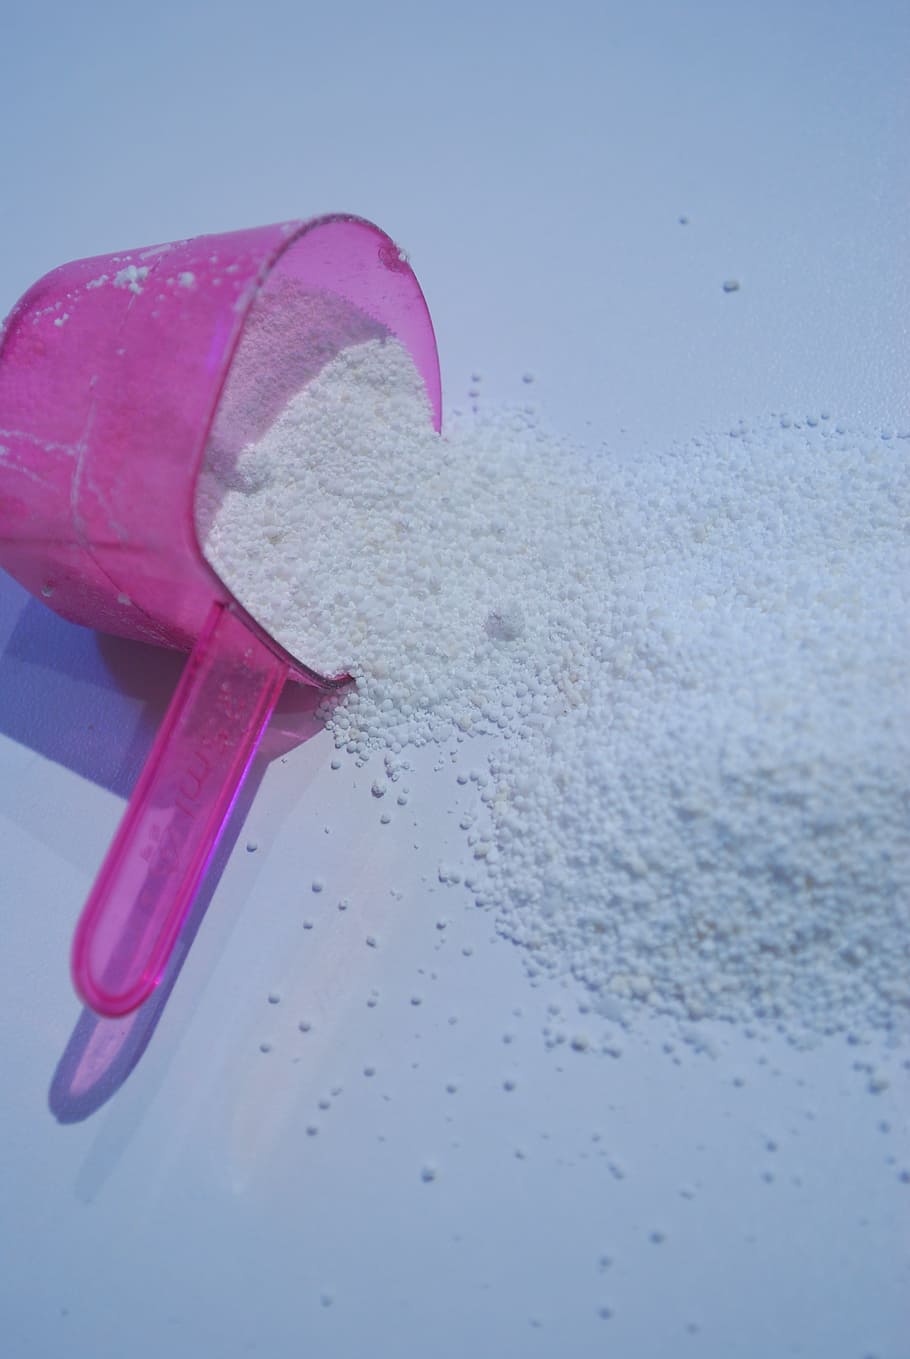 powder, bleach, whitewash, wash, cleanup, taxonomic order, chemistry, chemical, granules, pink color